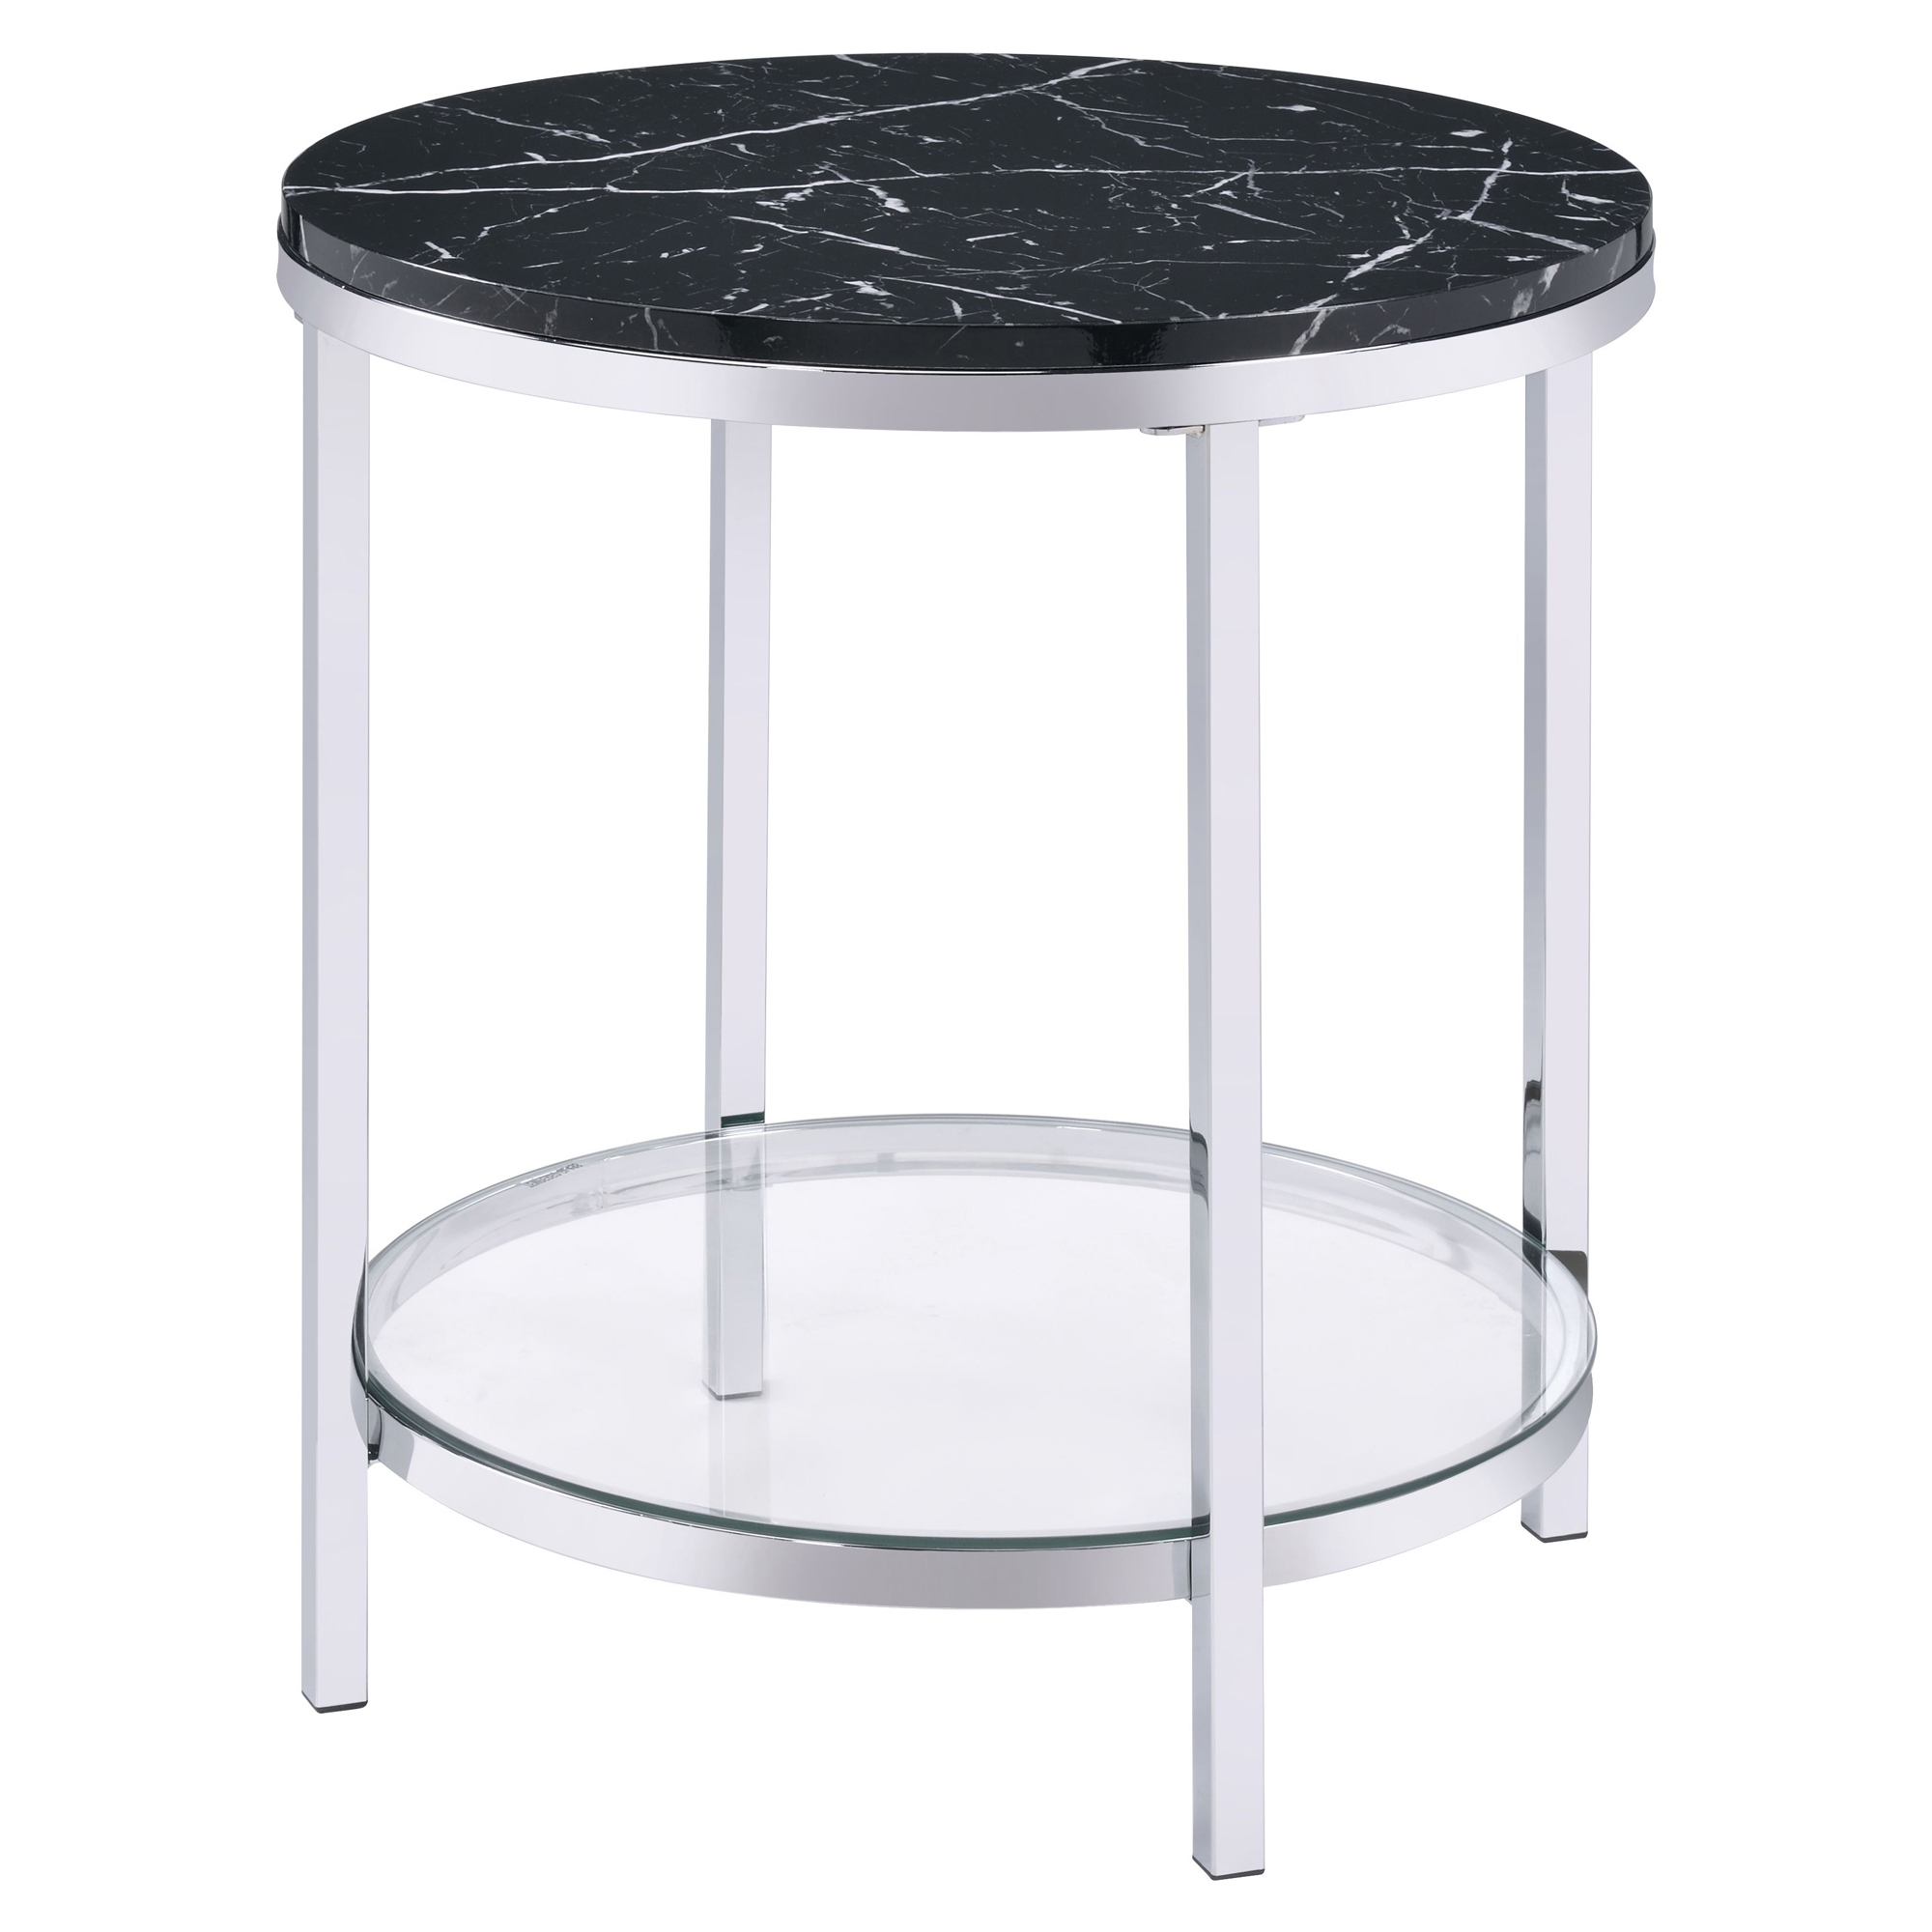 ACME Virlana Round End Table in Black and Chrome - image 1 of 5